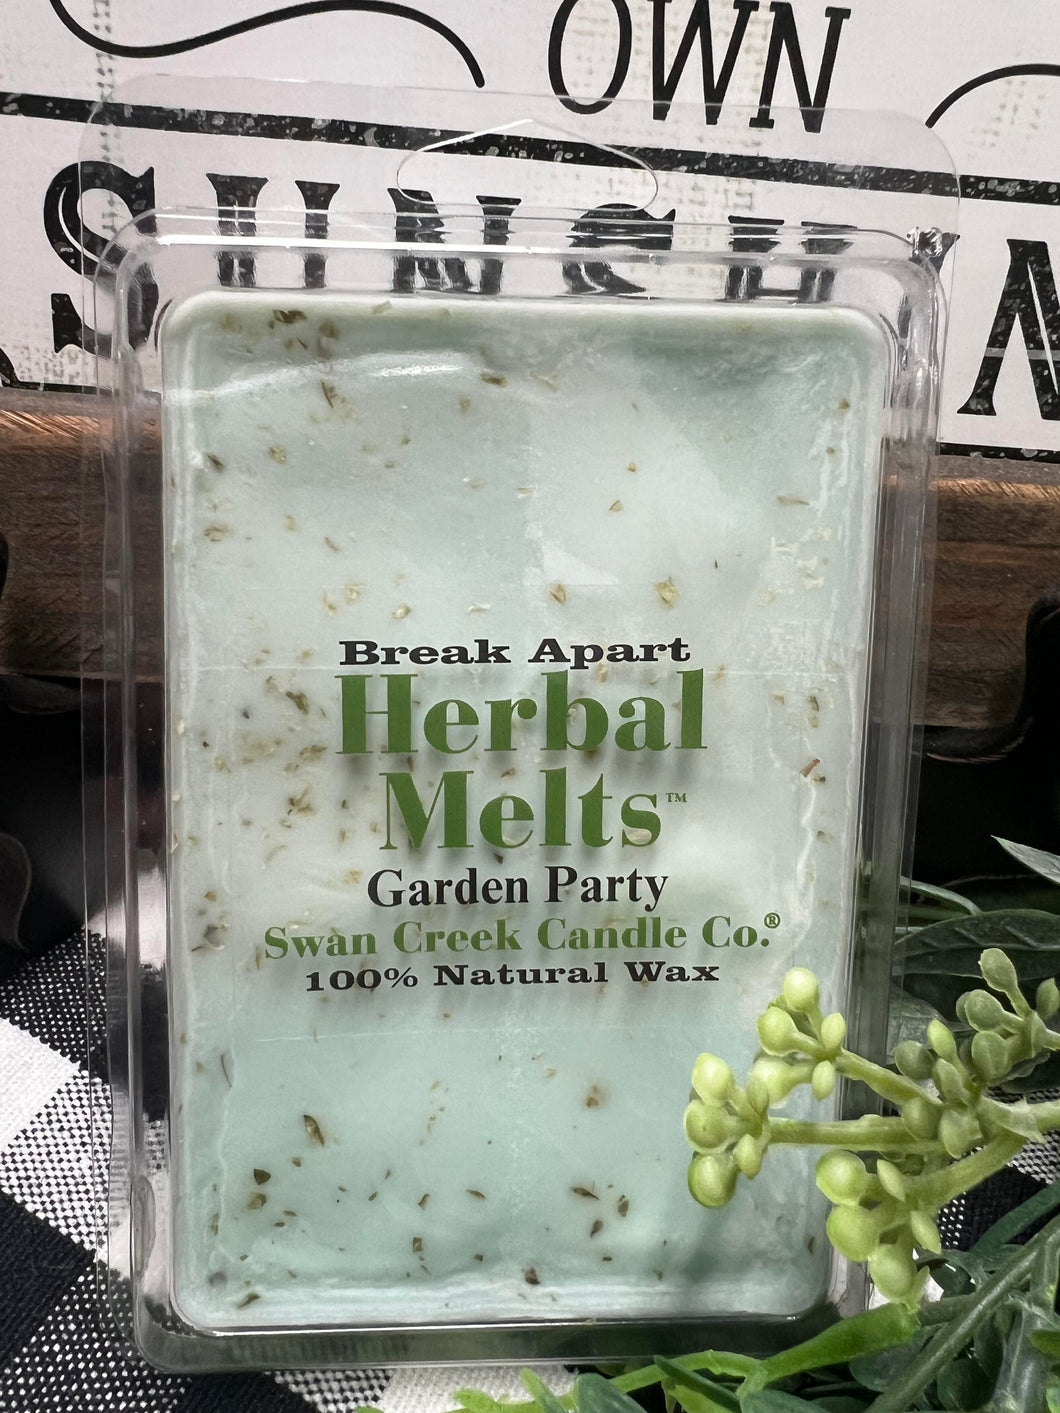 Swan Creek Candle Co. Garden Party Herbal Melts